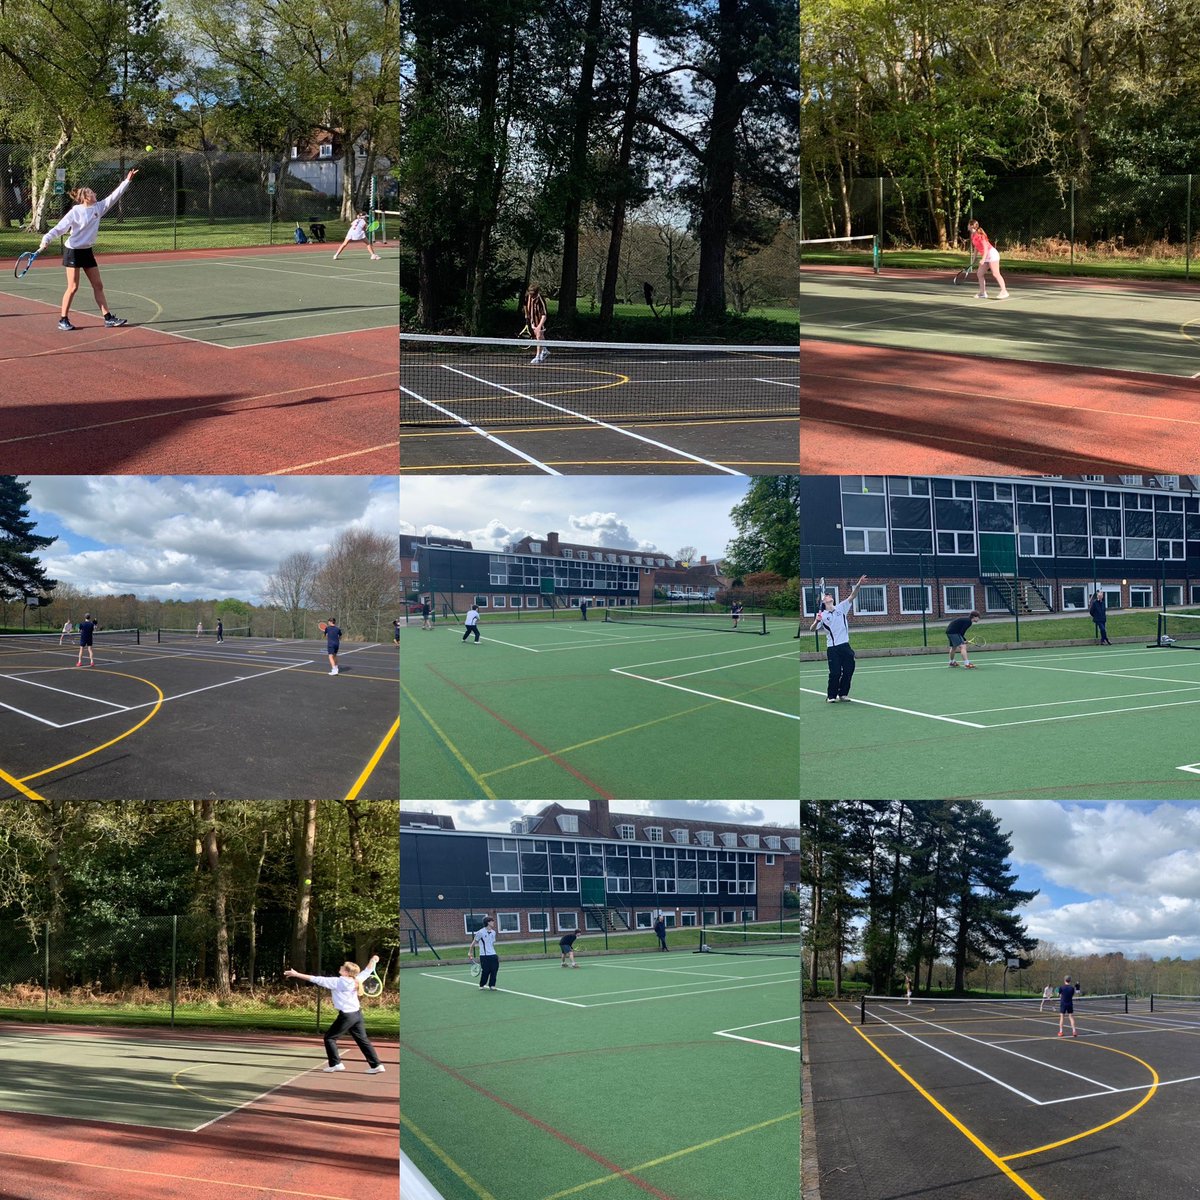 Super start to Trinity term as we kicked off with our tennis first fixtures! 🎾 Seniors victorious vs @LPSchool and Senior Girls losing 12-10 on a super tie break in the #AberdareCup vs @DowneHouse ! It couldn’t have been any closer! 👏🤝  @OratorySport